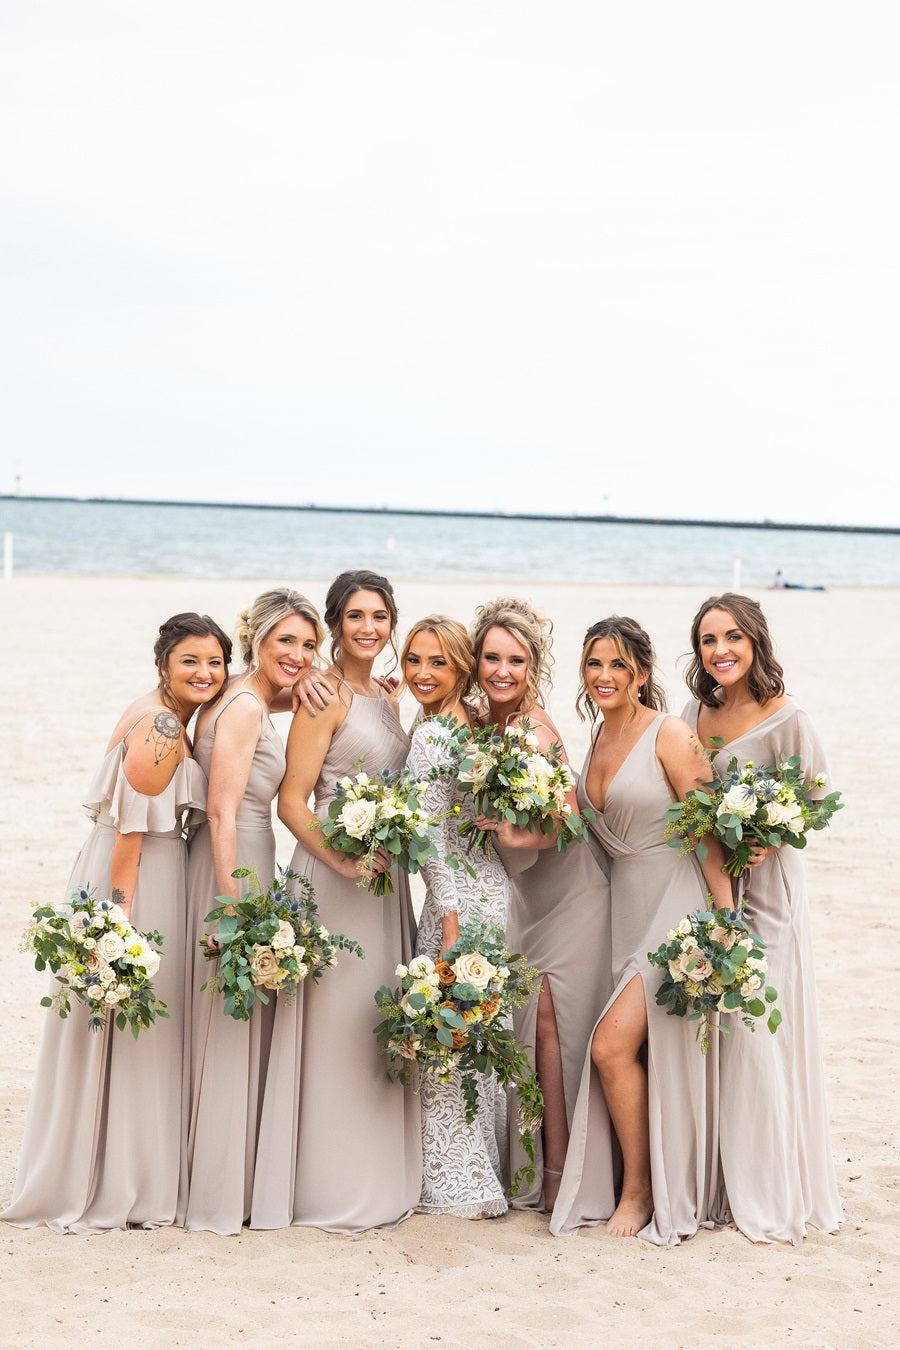 Bridal party poses on the beach, bride in white, bridesmaids in a warm light gray. All holding matching bouquets in the green, white, and blue w/ toffee accents color palette.